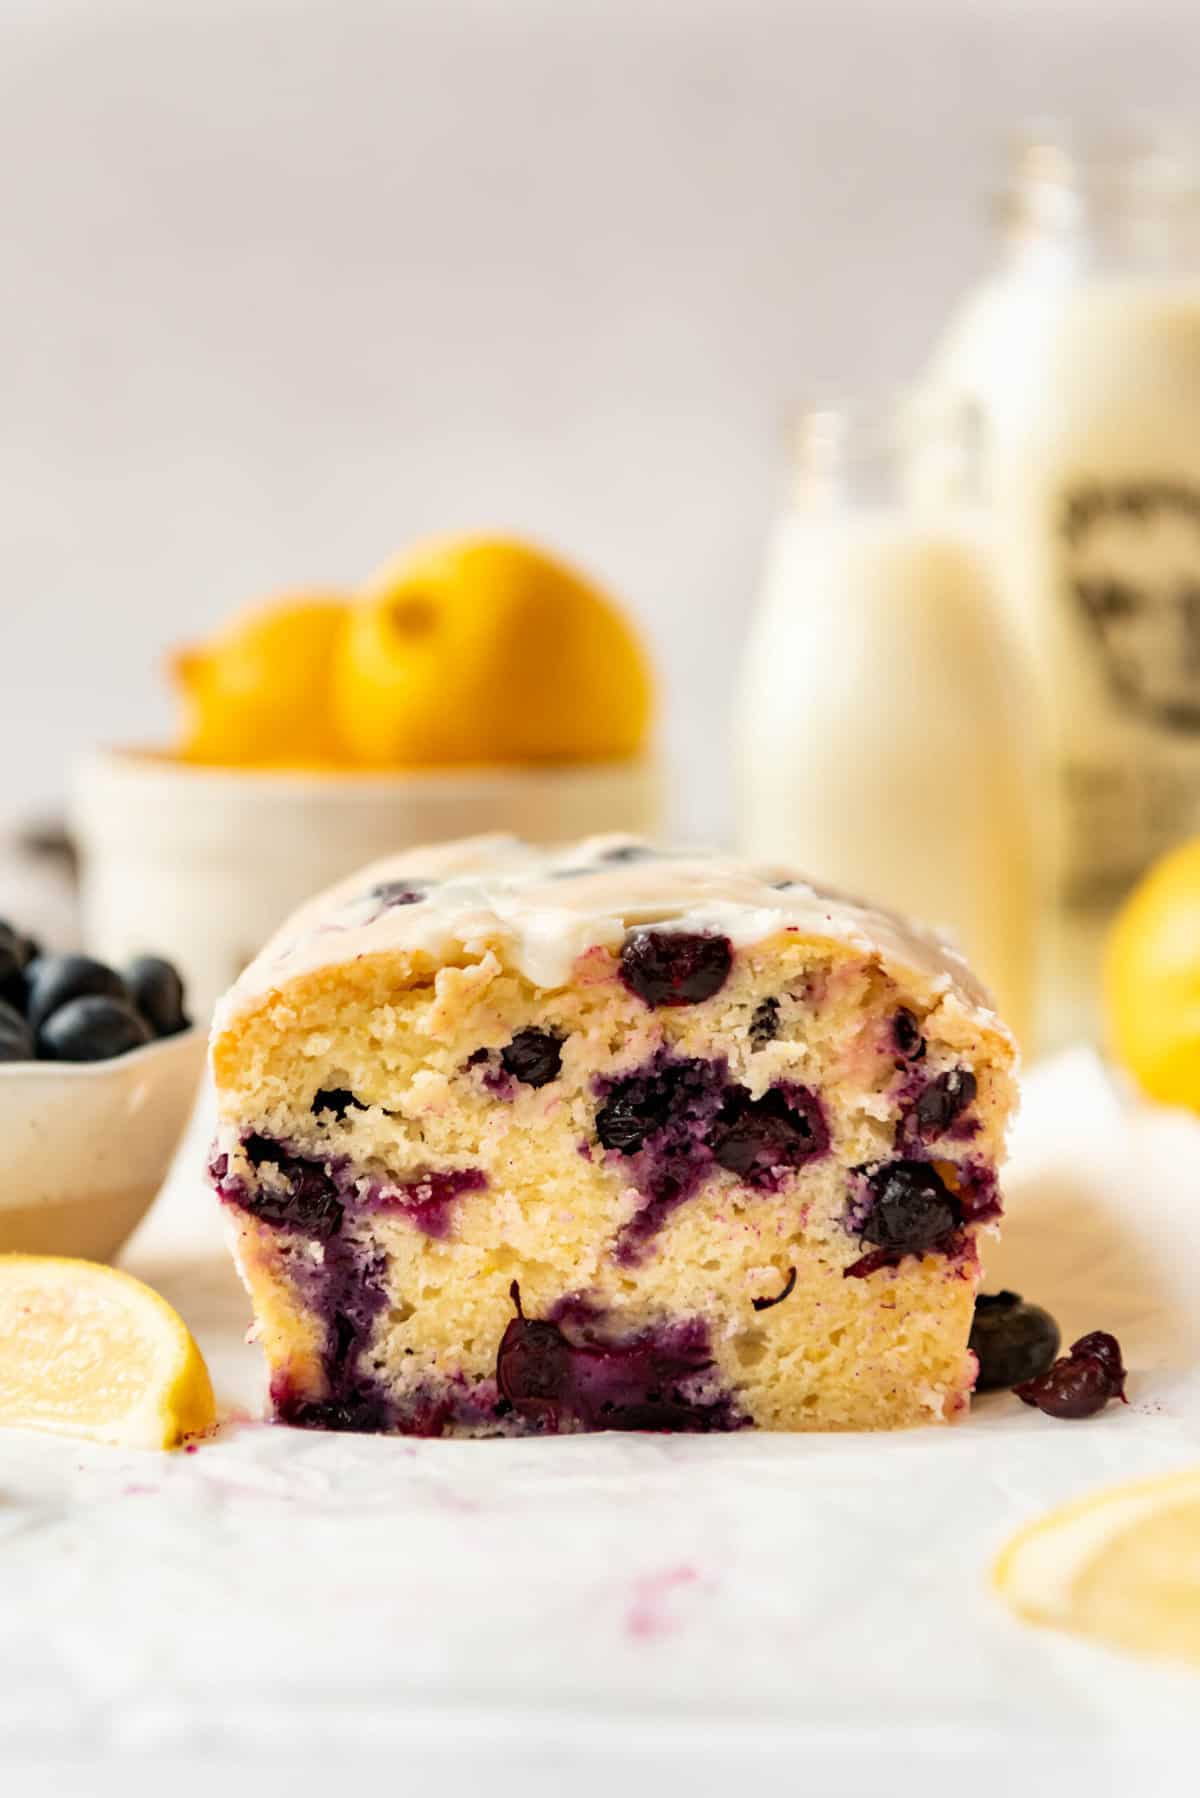 A cross-section of lemon blueberry bread with glaze on top.